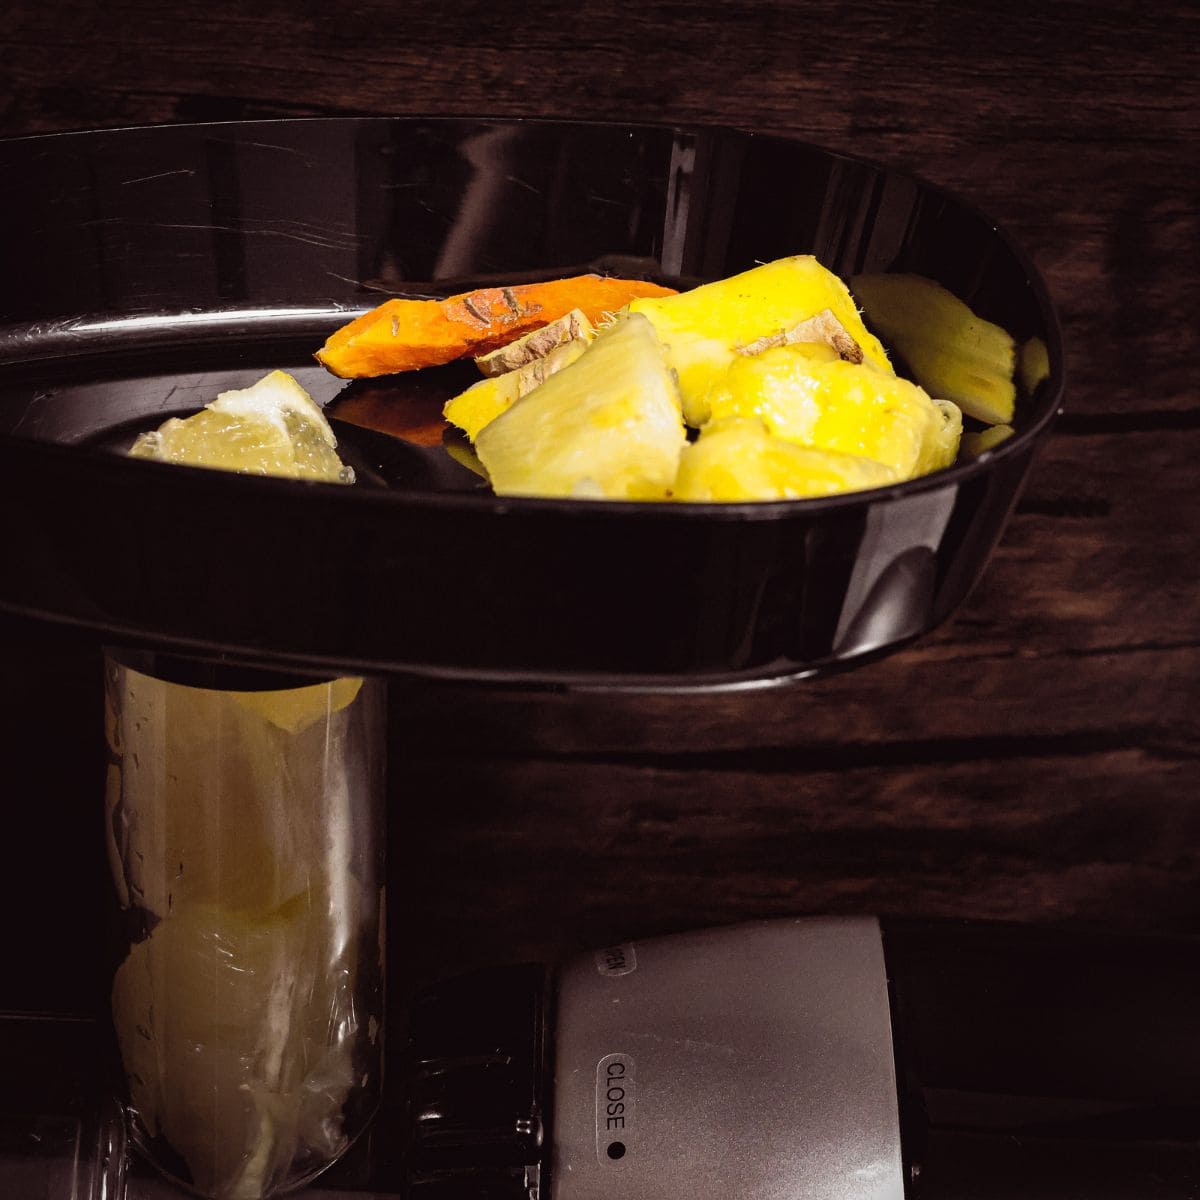 Ingredients for an anti-inflammatory juice including ginger, turmeric, and pineapple loaded into the top of a juicer, ready for extraction.